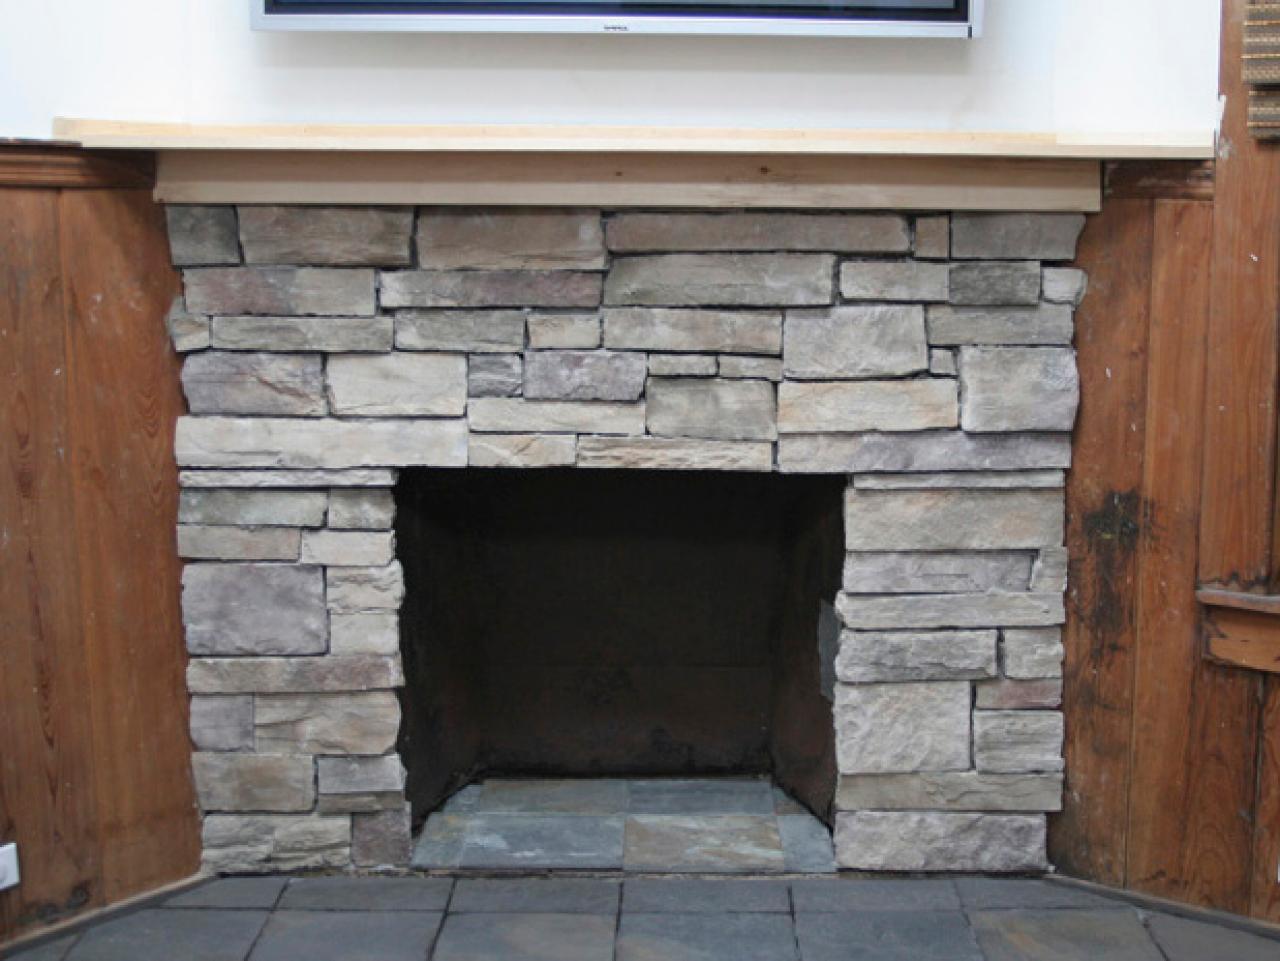 Cover A Brick Fireplace With Stone, How To Remove Stone Fire Surround